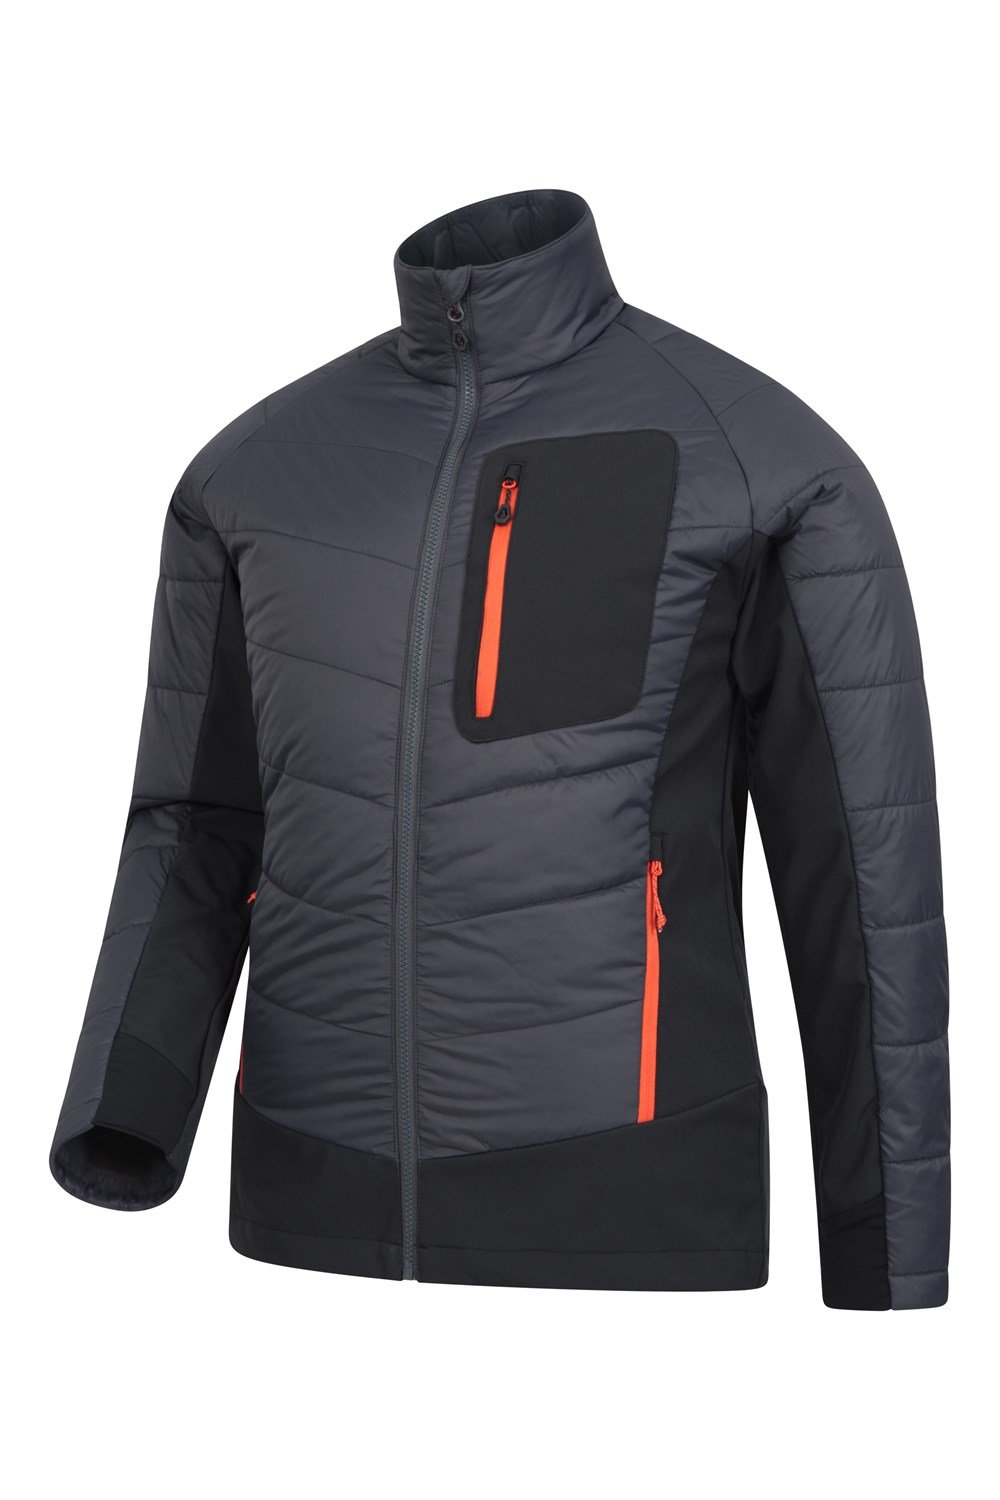 Mountain Warehouse Rotate II Mens Padded Jacket Water Resistant ...